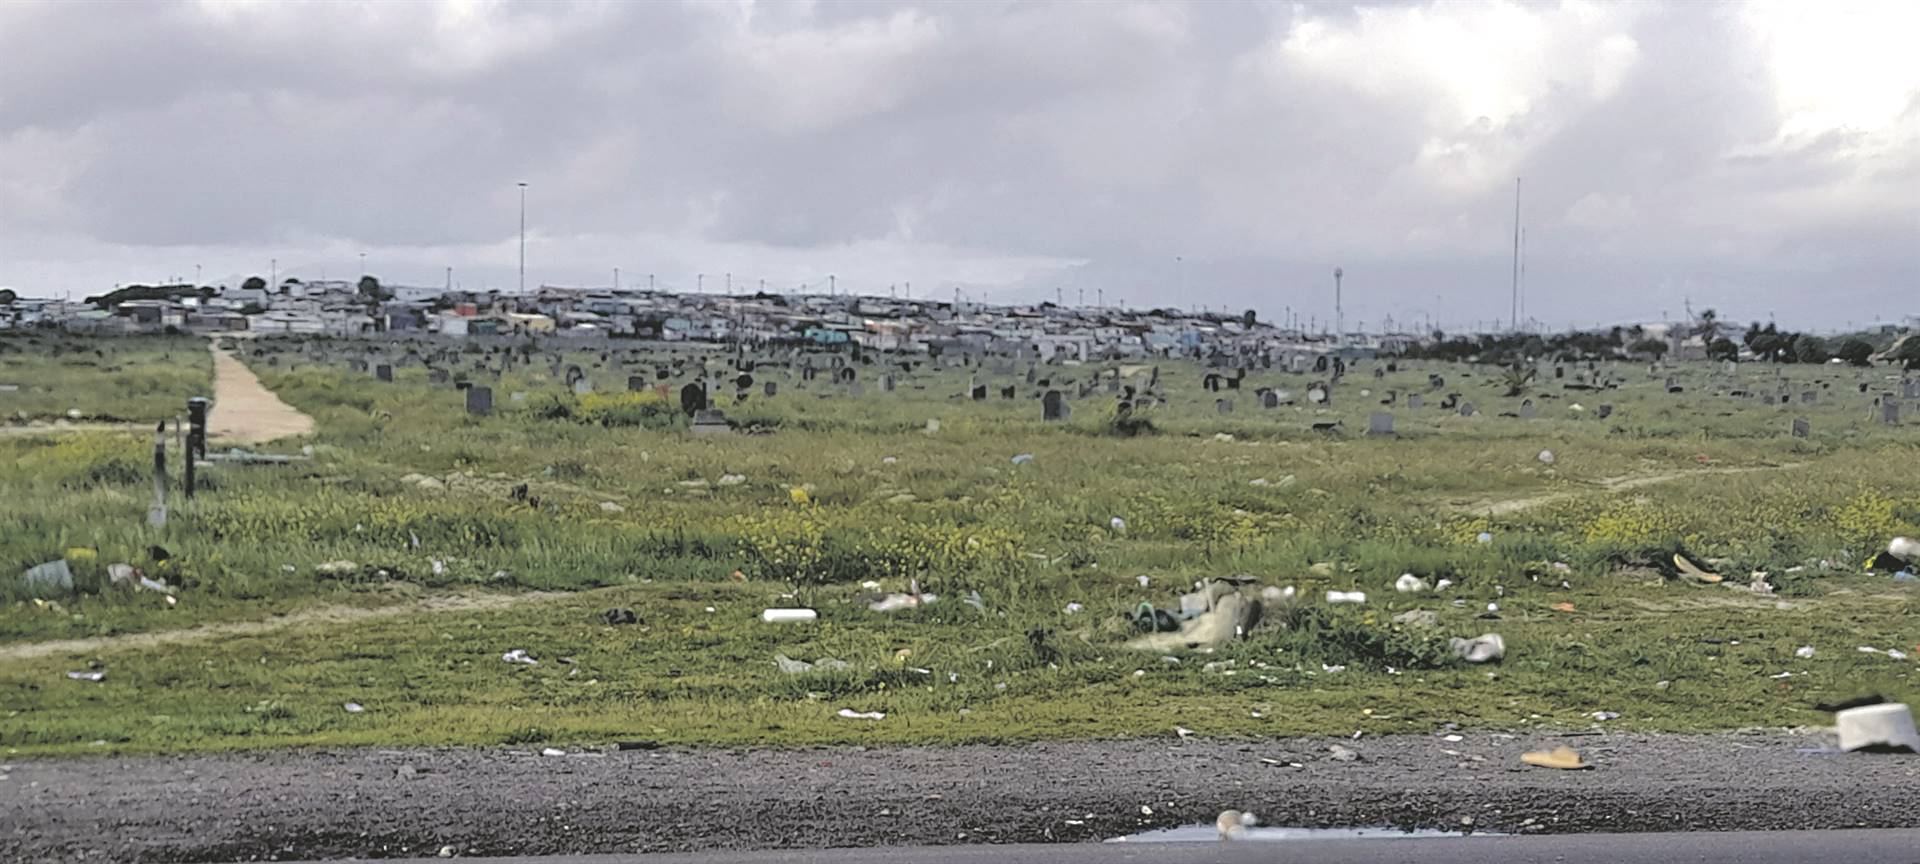 The residents who have buried their relatives at the cemetery in Khayelitsha are not happy that cows graze in the graveyard.                        Photo by Lulekwa Mbadamane